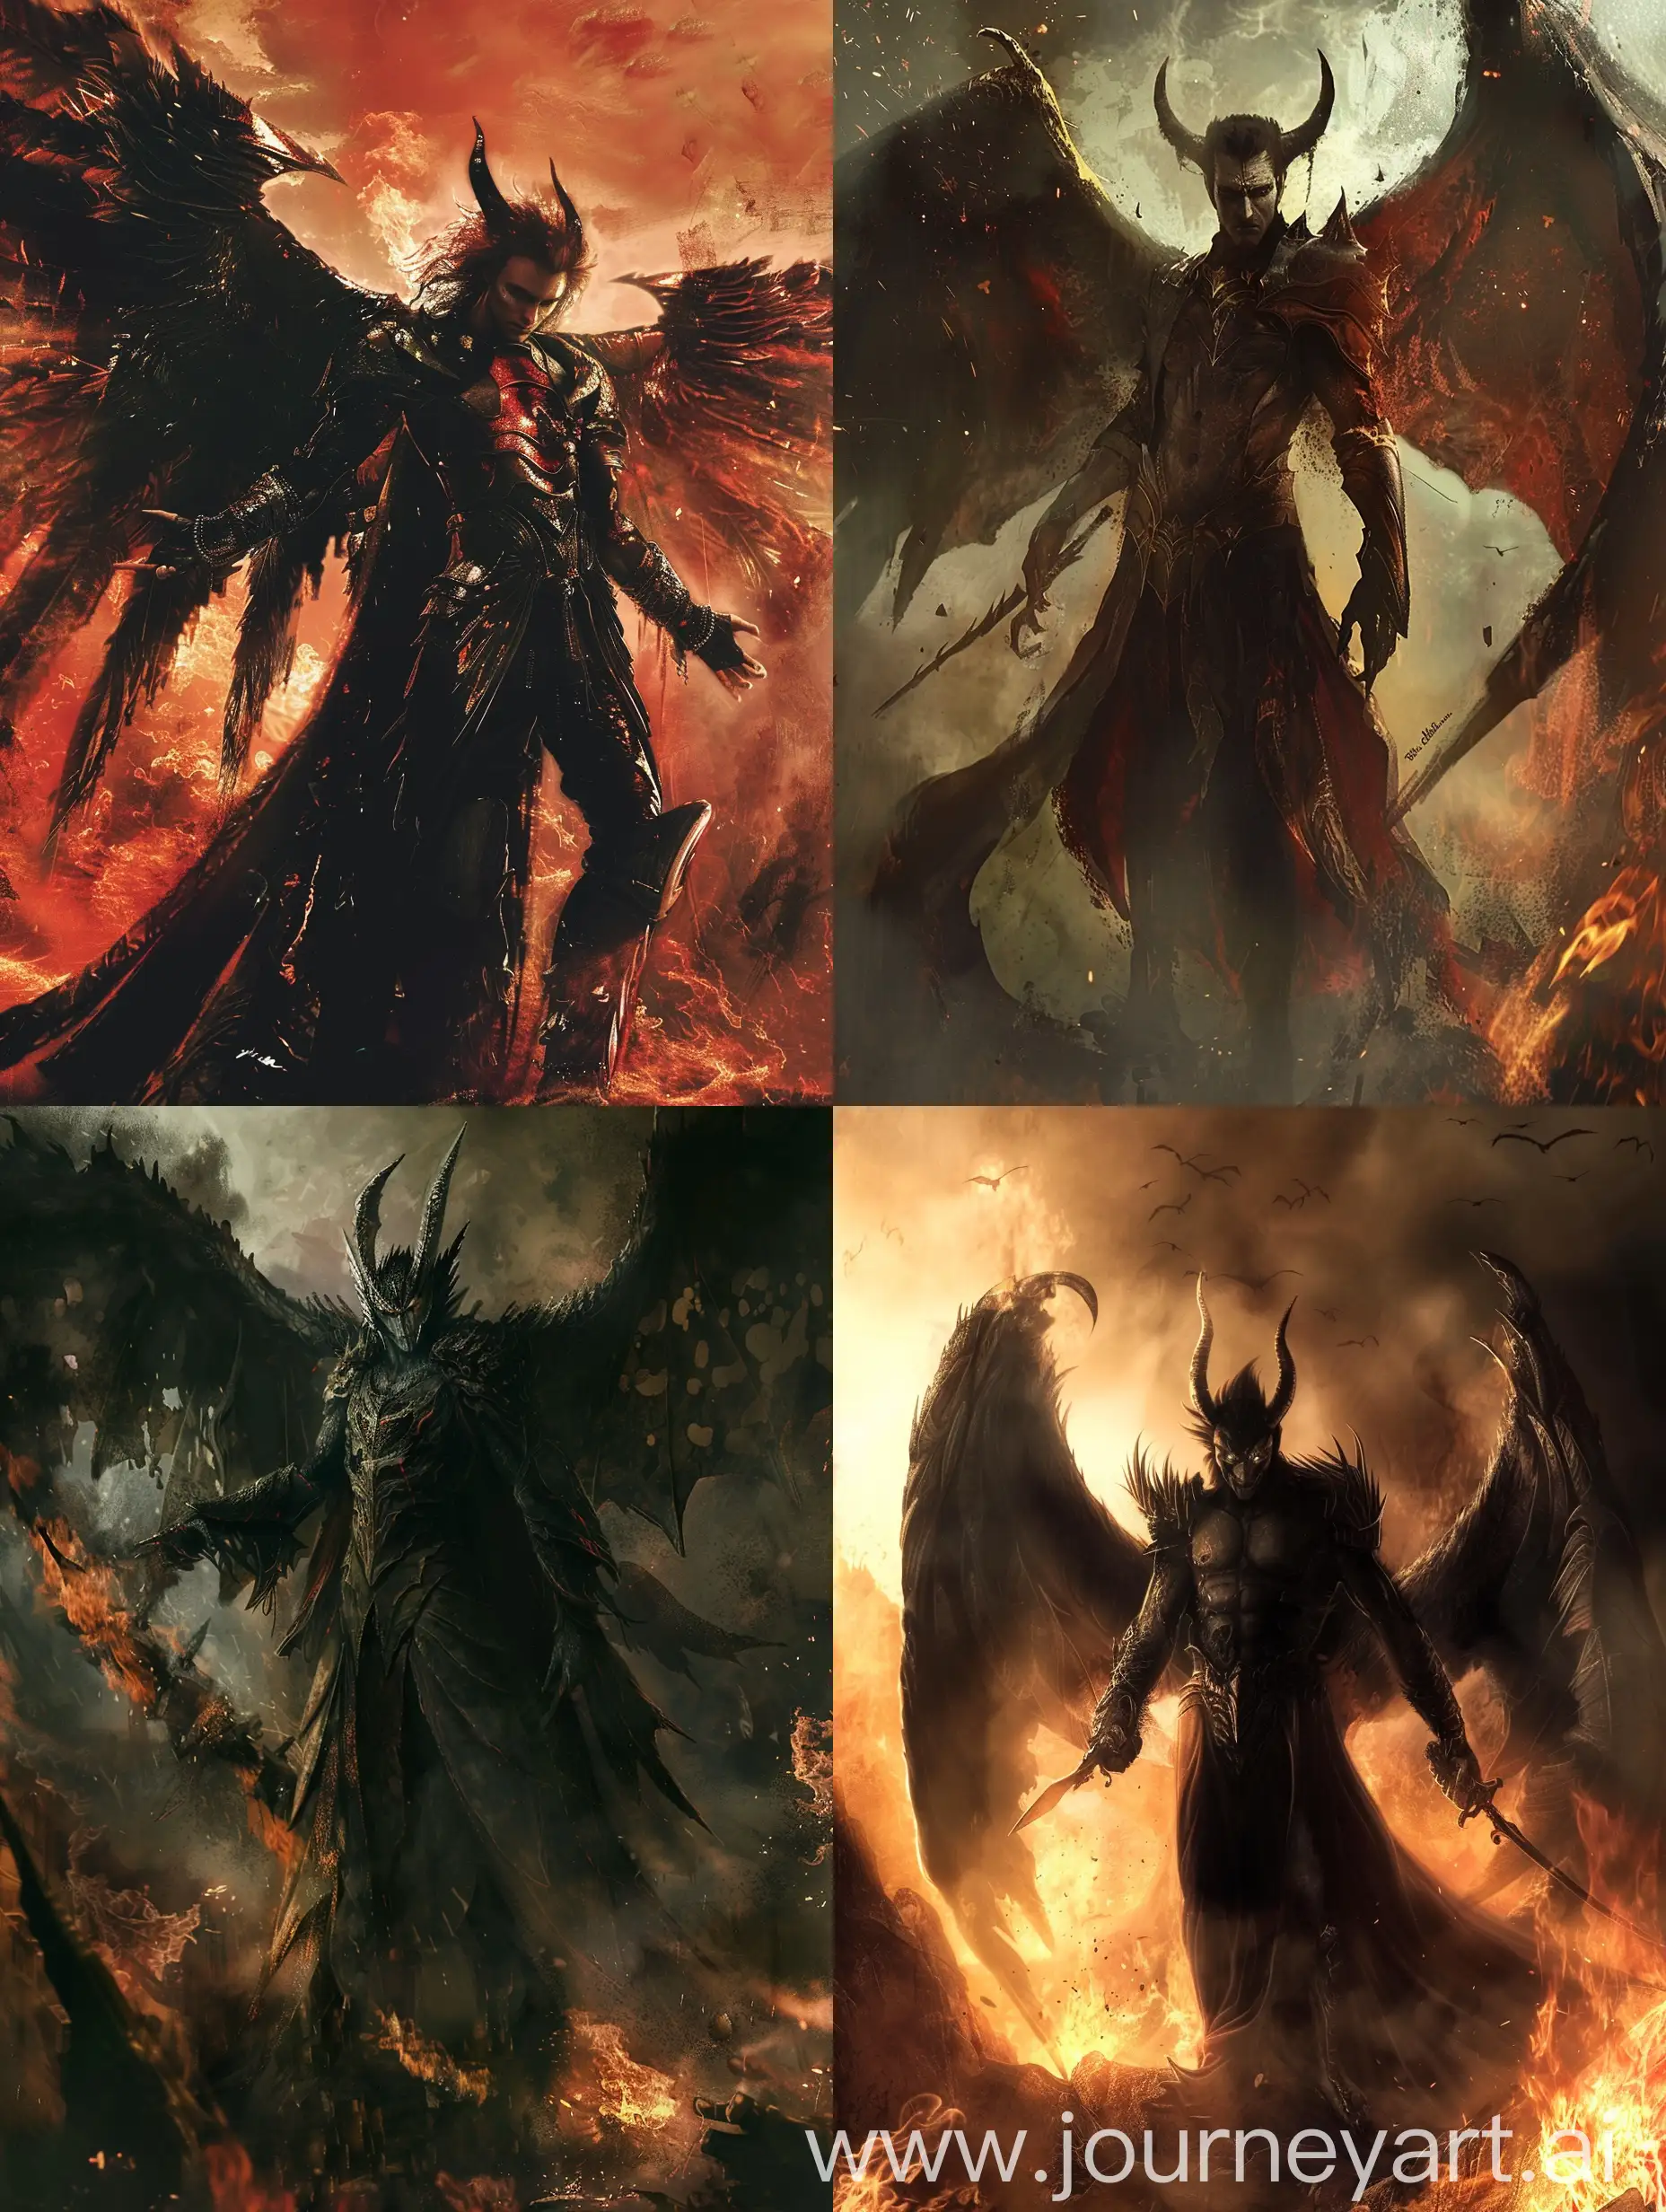 Dominant-Lucifer-Overseeing-Fiery-Kingdom